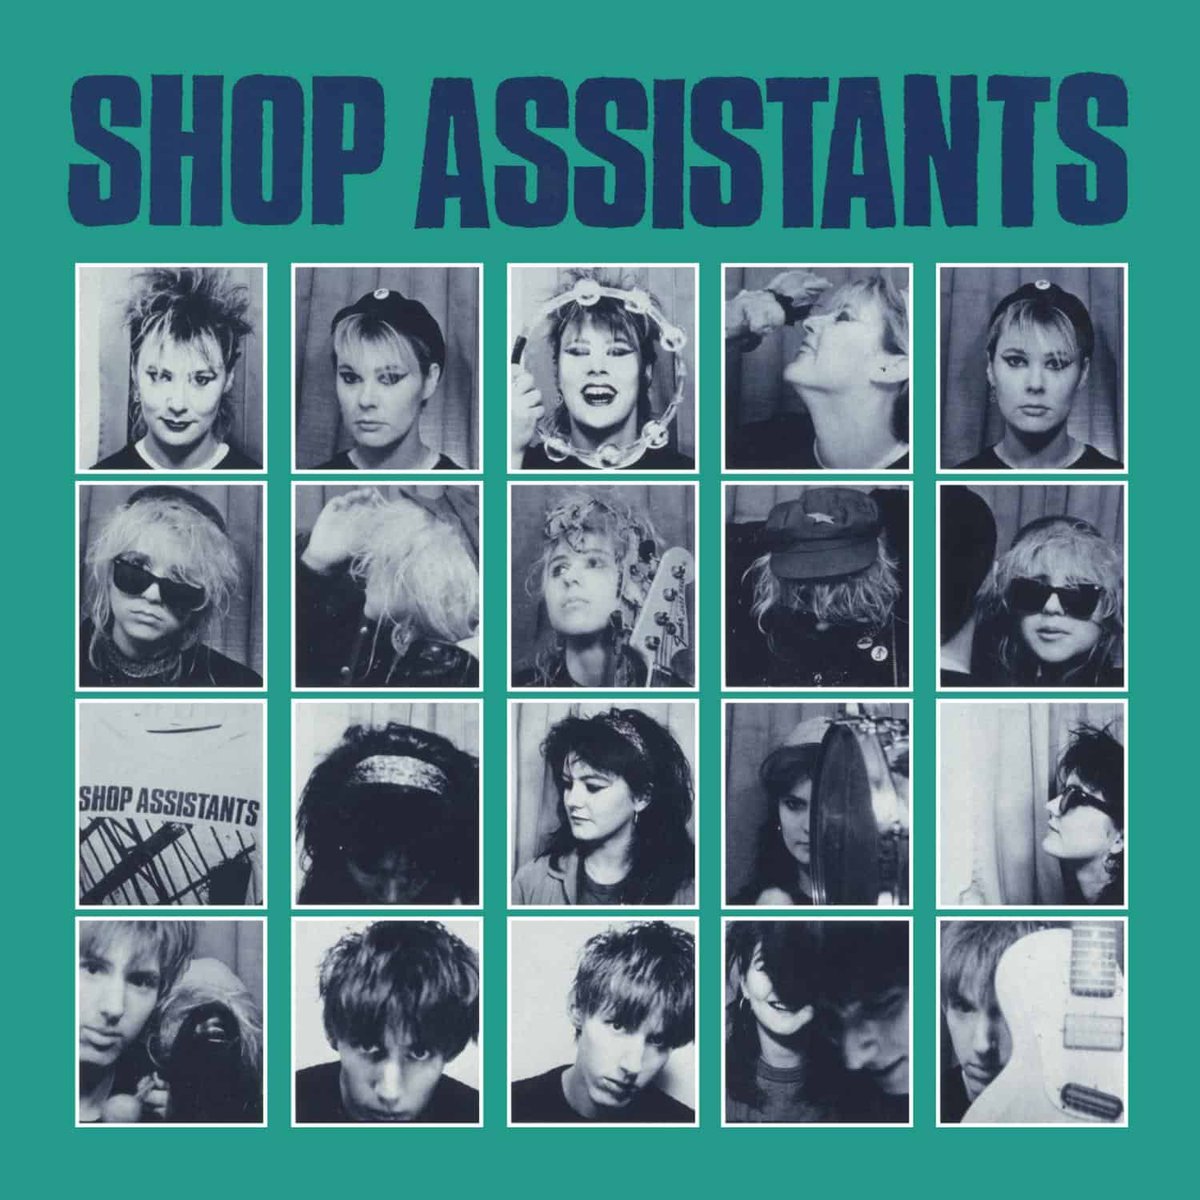 PRE-ORDER: 'Will Anything Happen' by Shop Assistants The sole album from the Edinburgh twee pop and C86 group gets an expanded reissue with bonus tracks which span from B-sides, unreleased tracks, Peel Session numbers, and demos. normanrecords.com/records/102451…